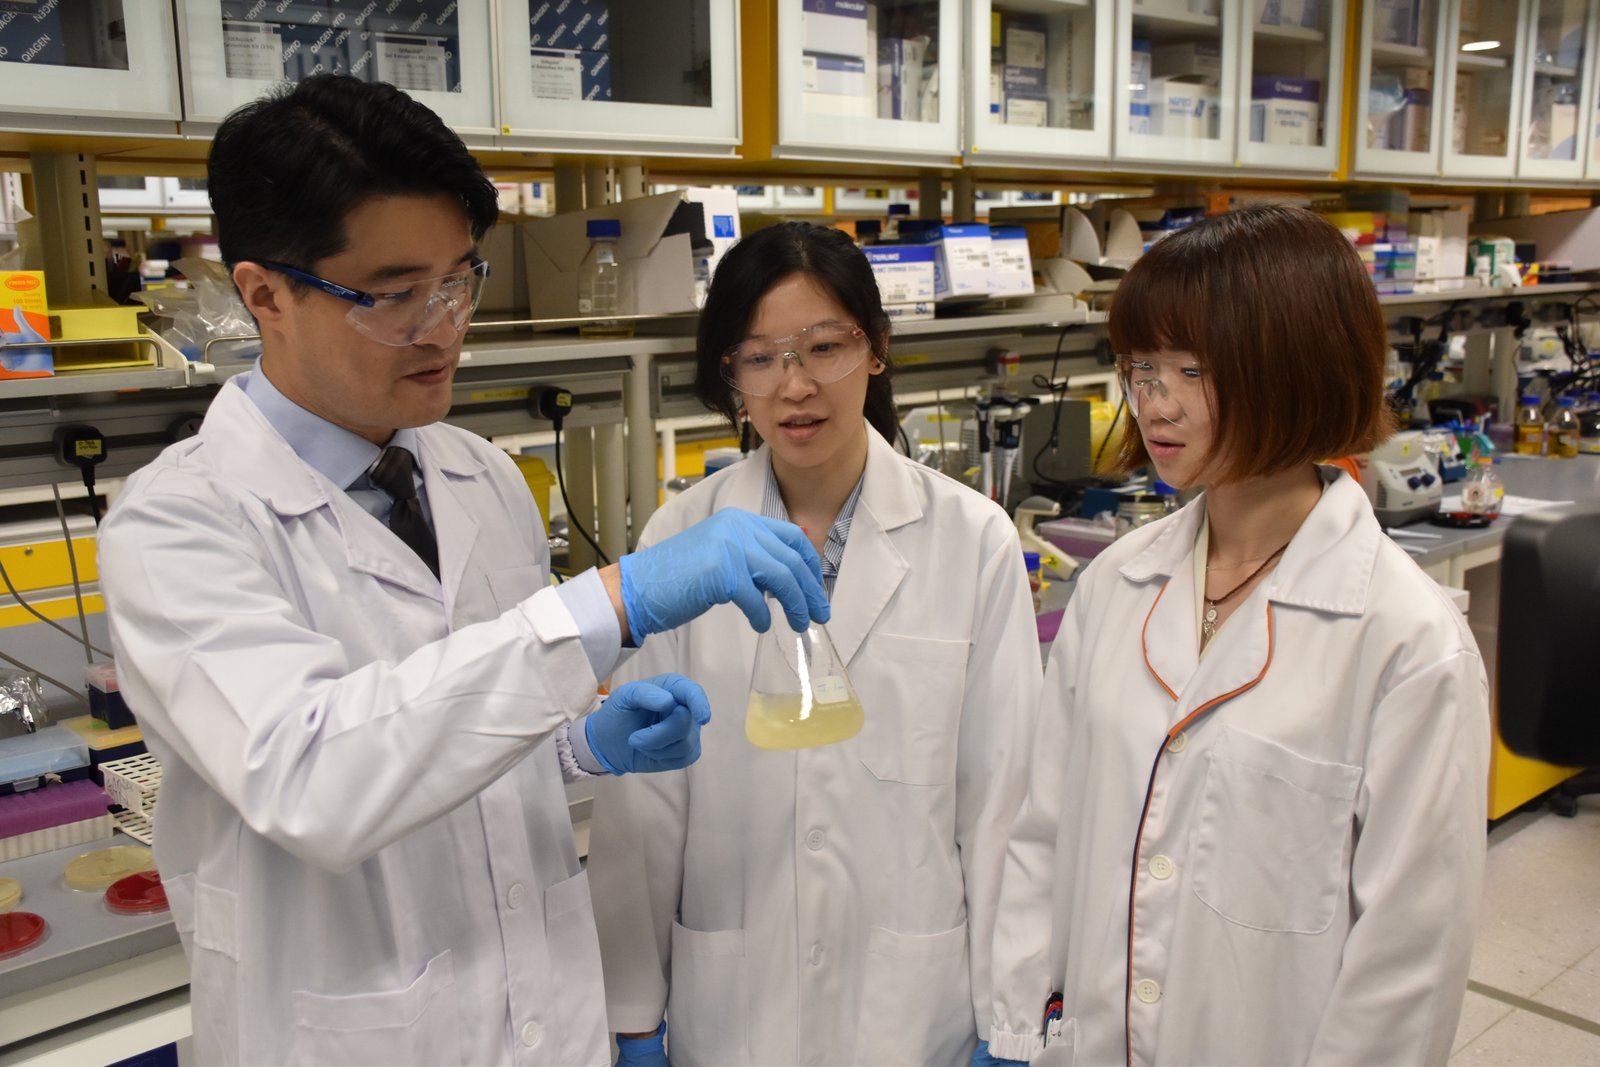 (from R to L) Assistant Professor John Chen with his research team, Chiang Yin Ning and Melissa Su